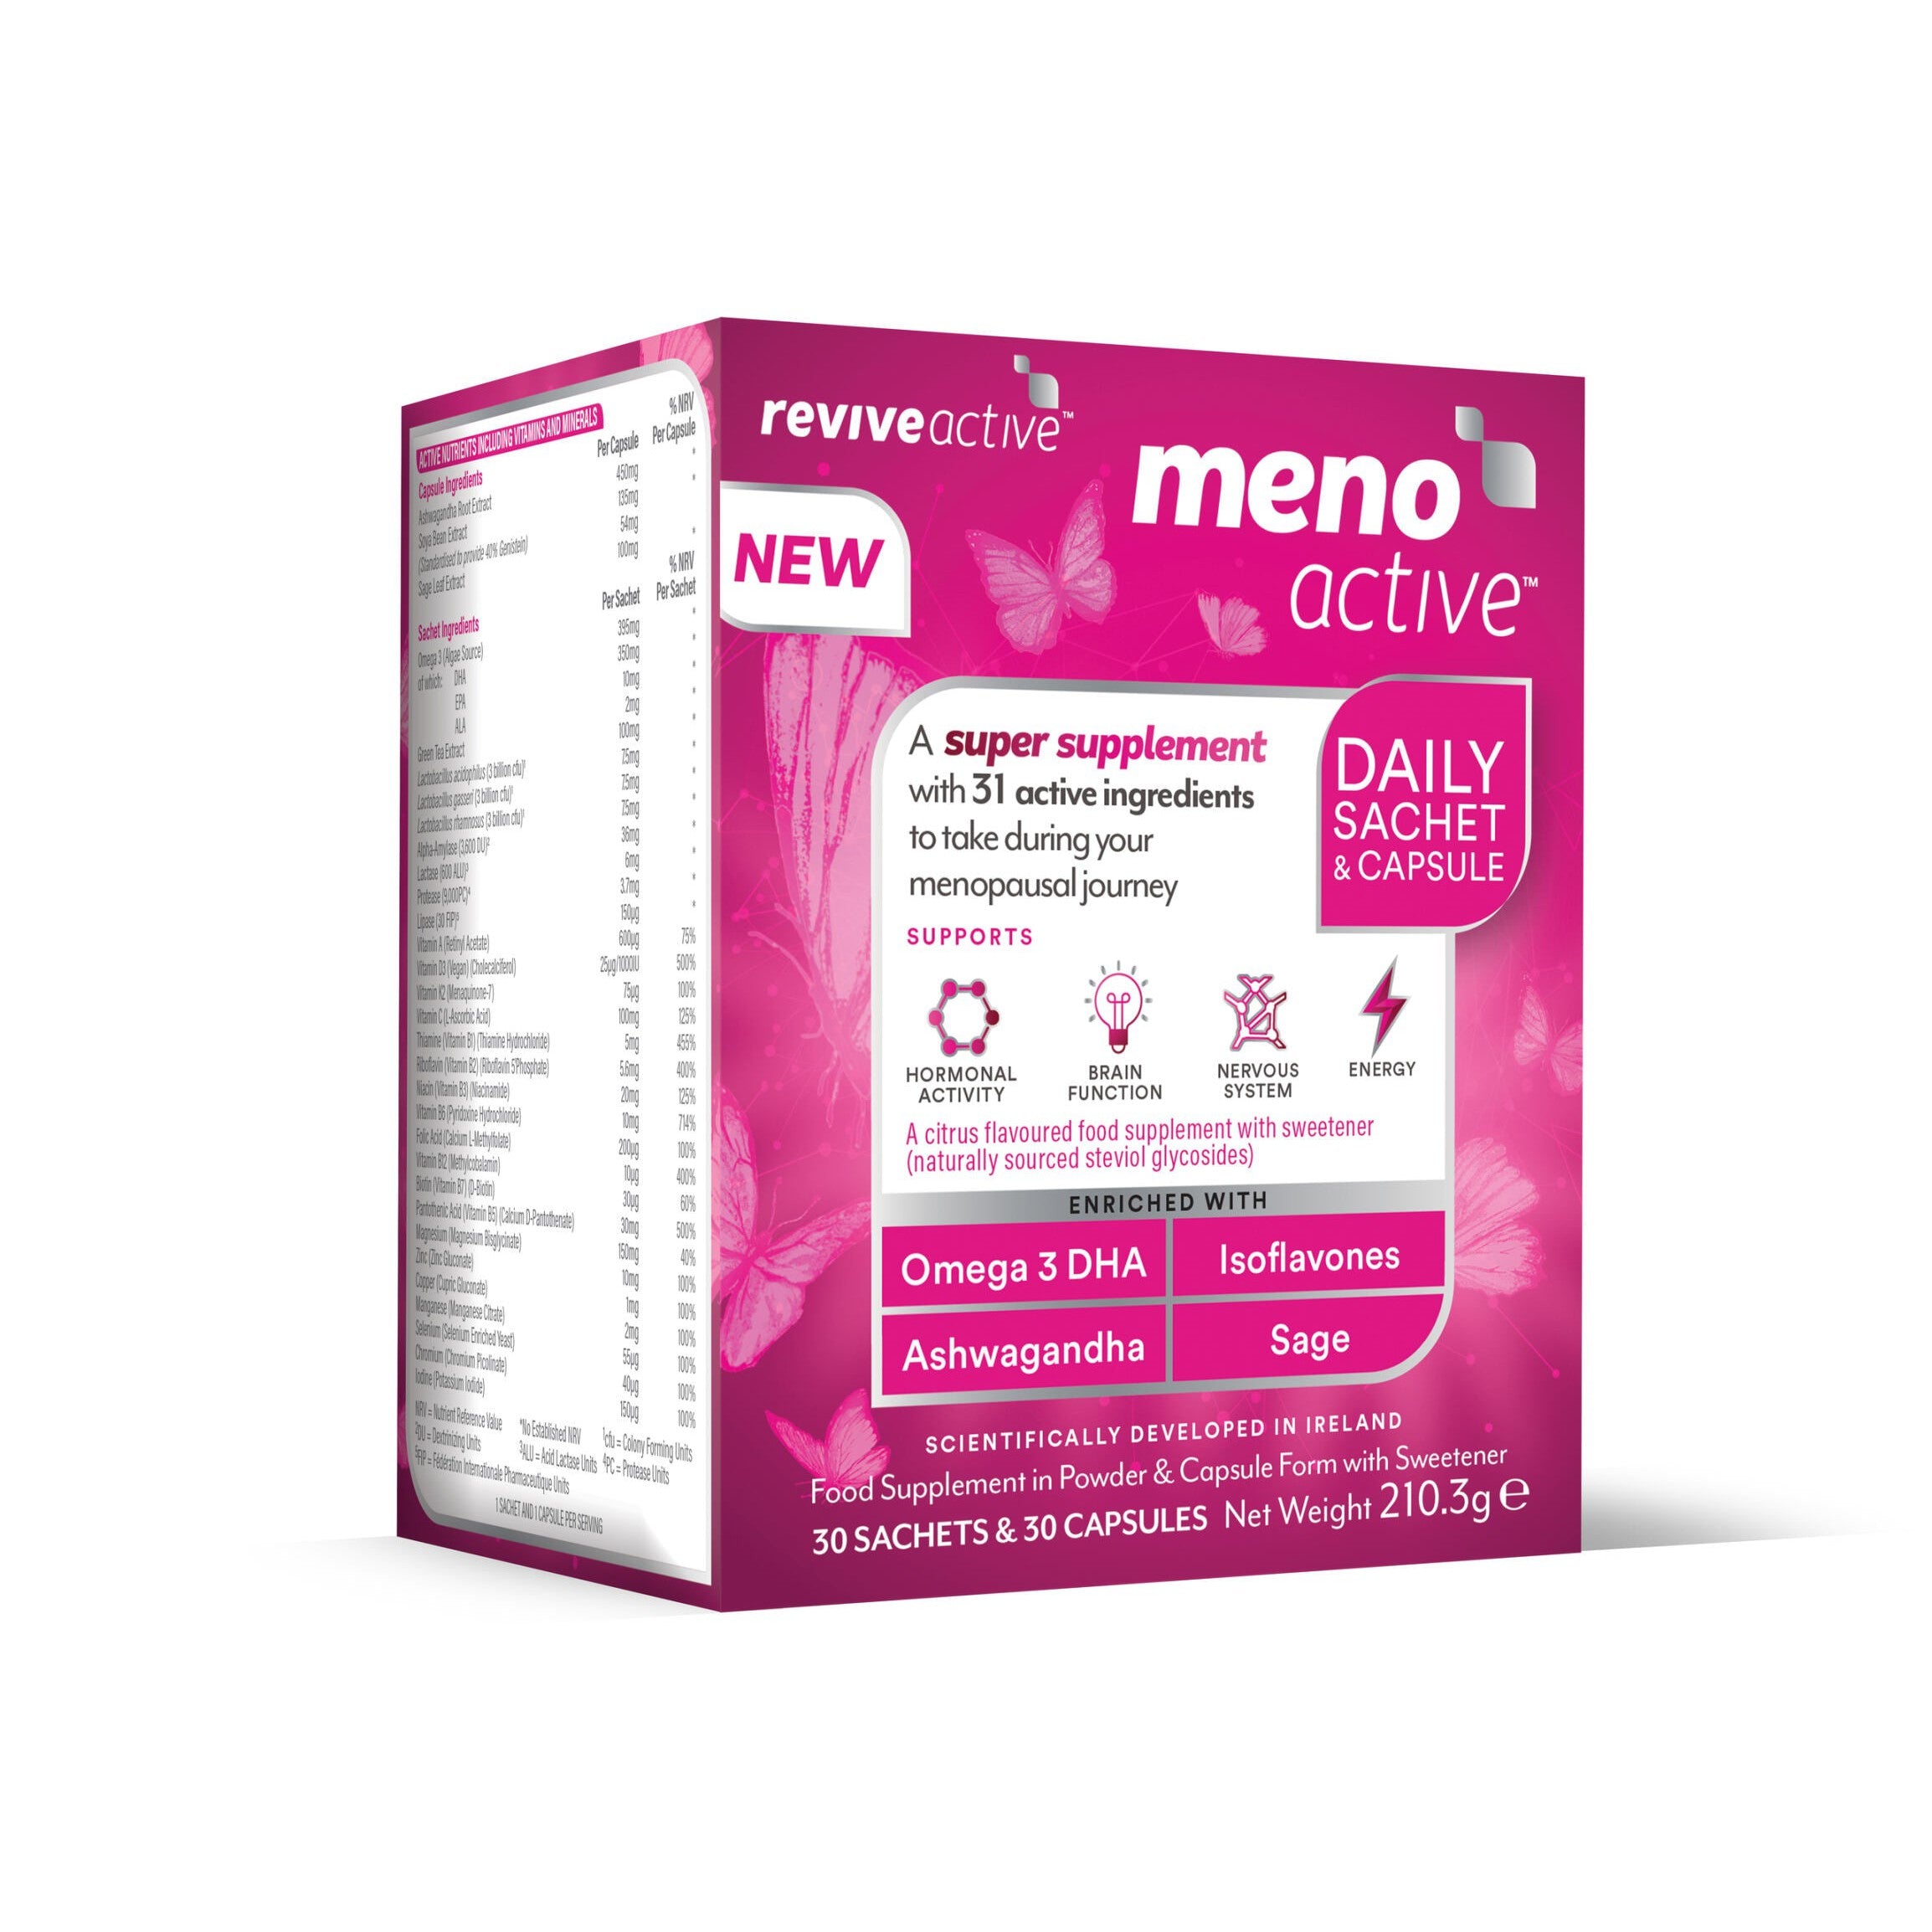 Revive Active Meno Active Menopause Supplements for Women 30 Day Pack